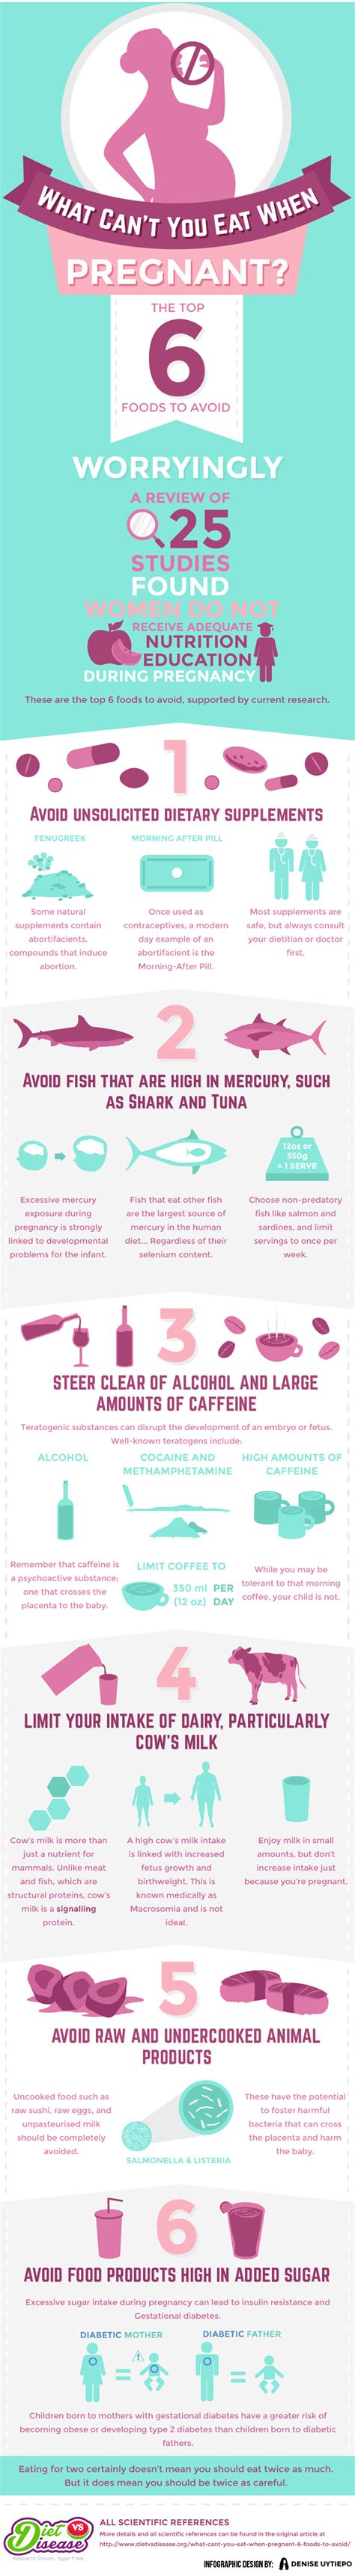 Top 6 Foods You Cant Eat When Pregnant Infographic